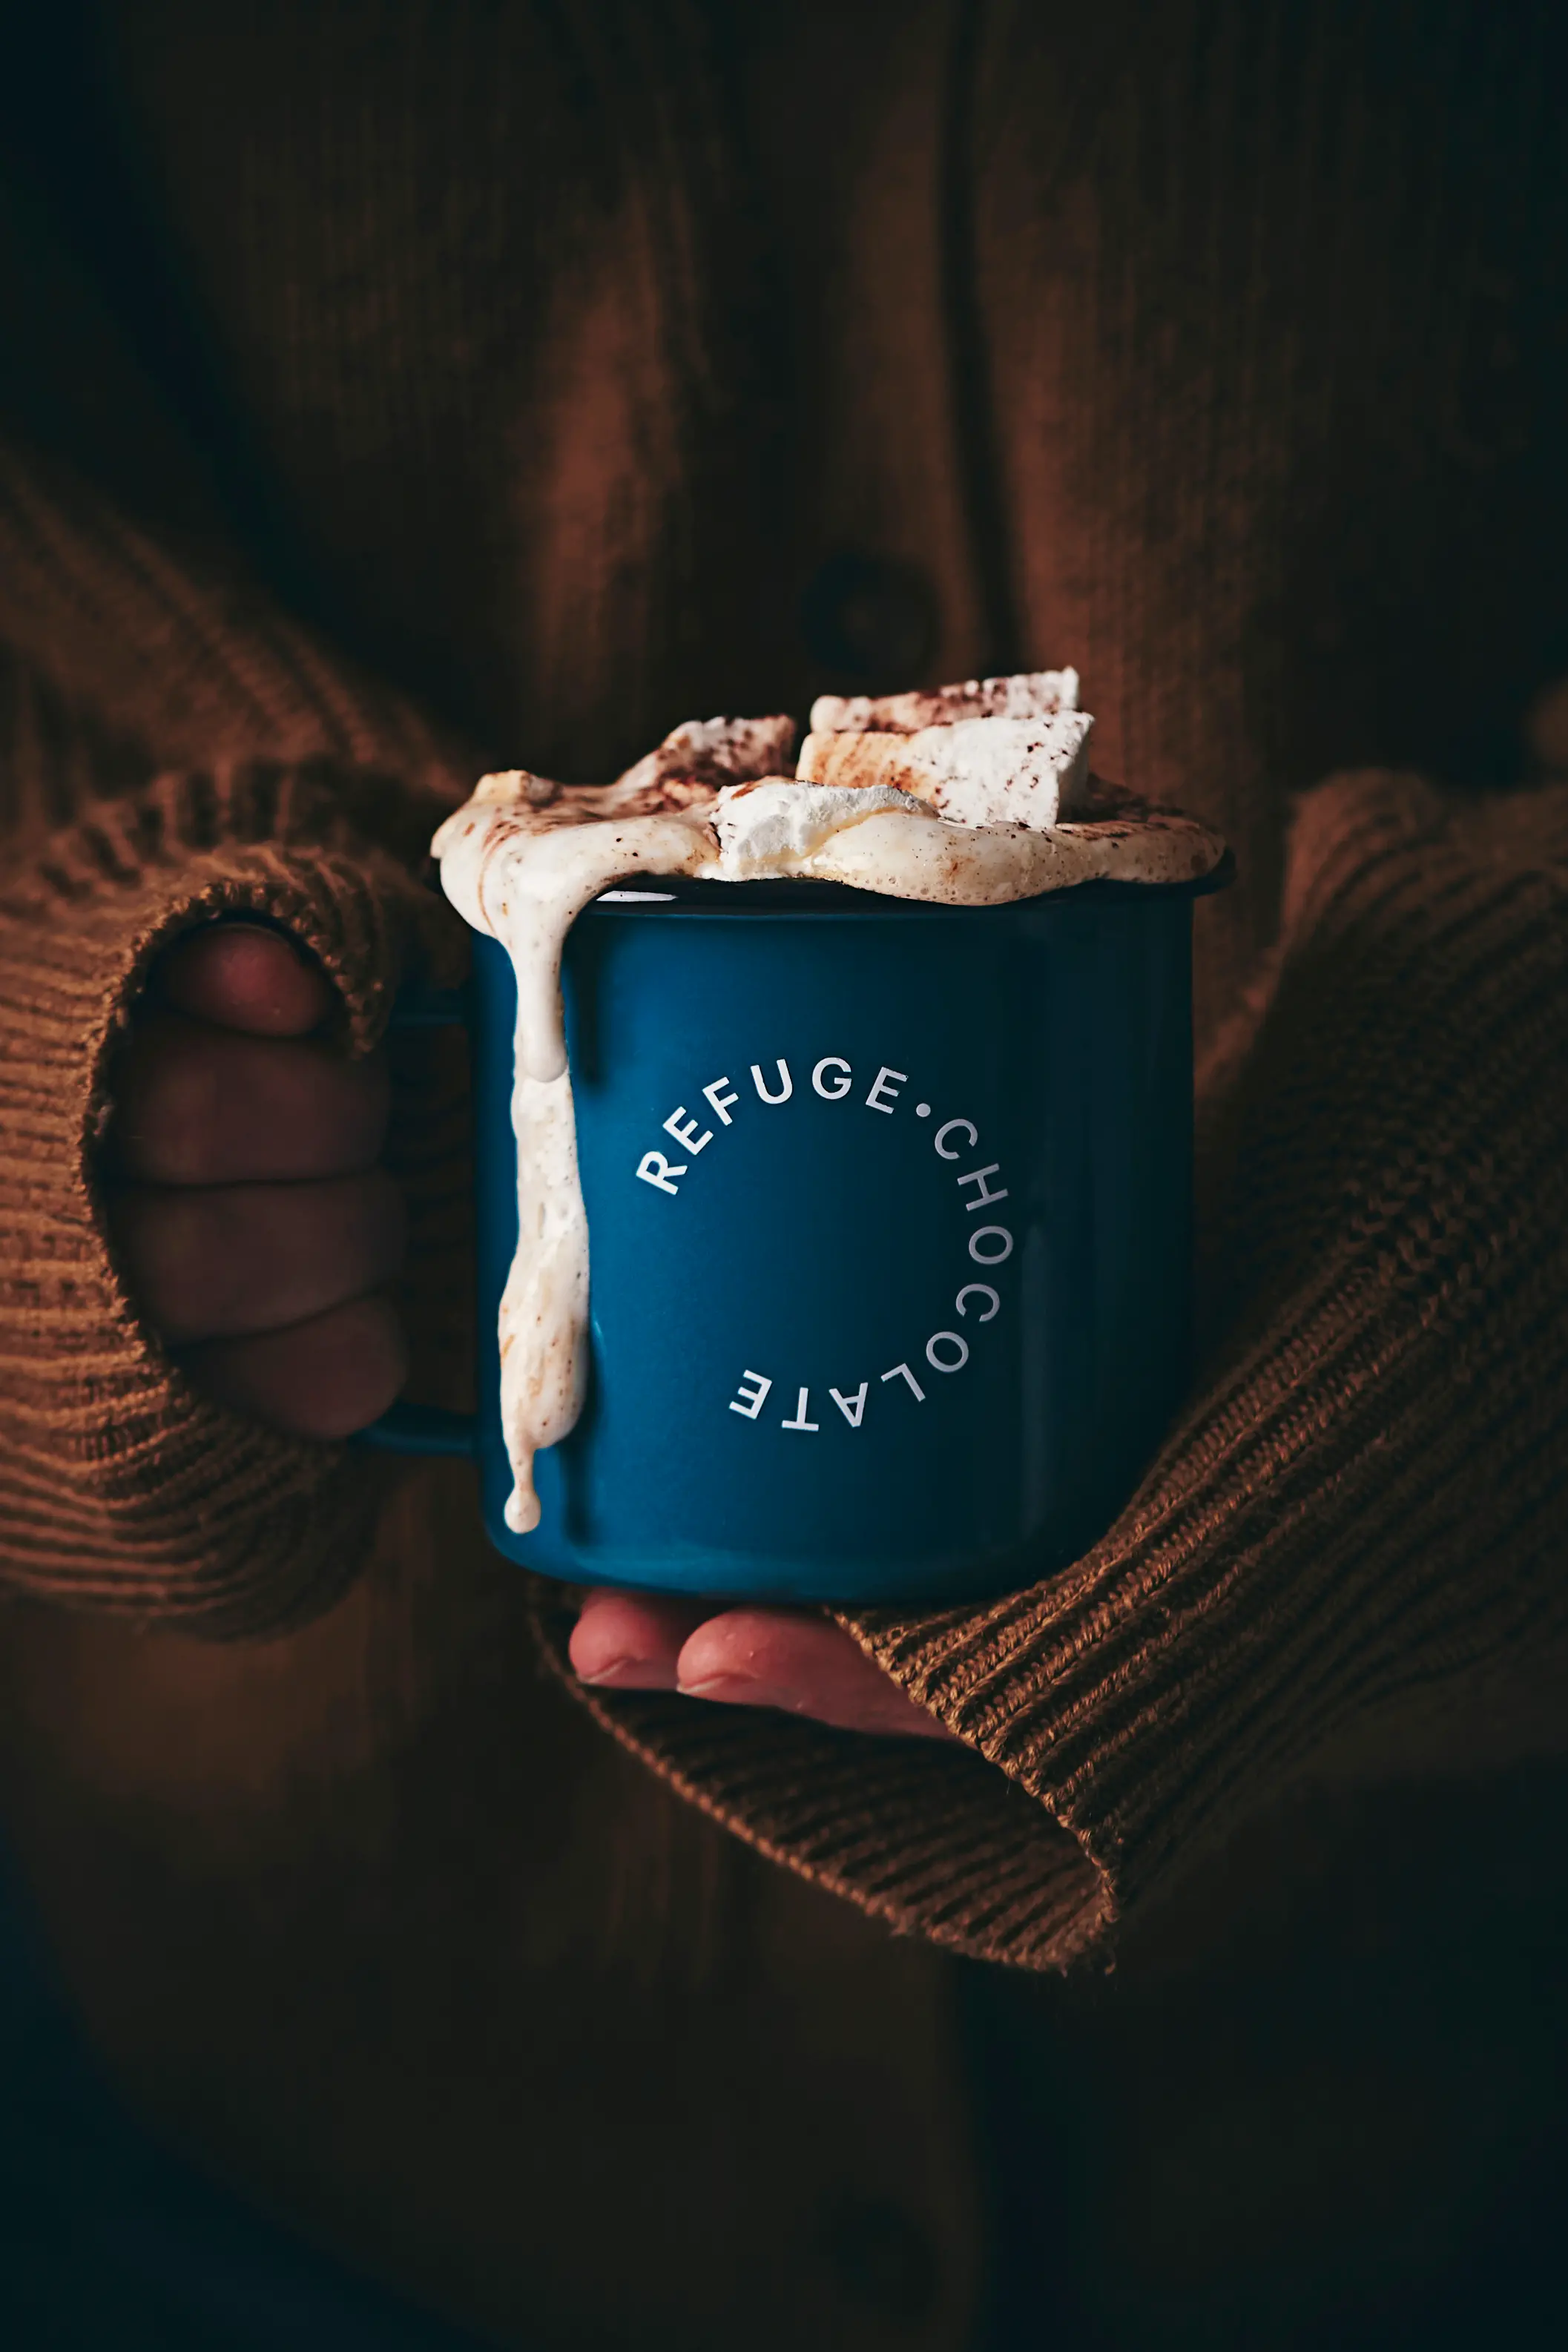 Branded Refuge Chocolate tin mug held in hands of cosy jumper. Melted marshmallows on top of the hot chcoolate.